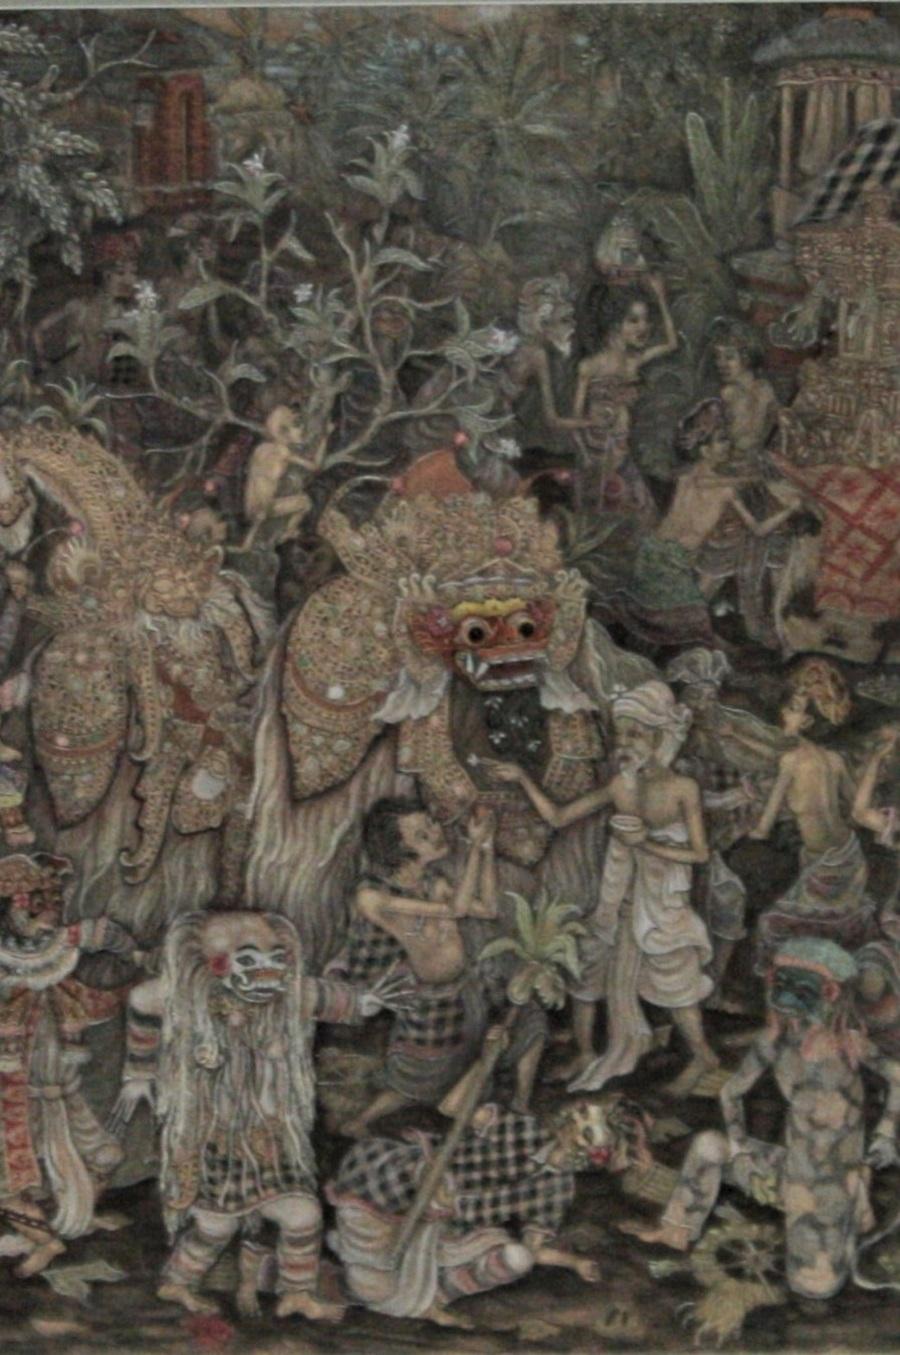 Balinese Folk Festival - Painting by Unknown